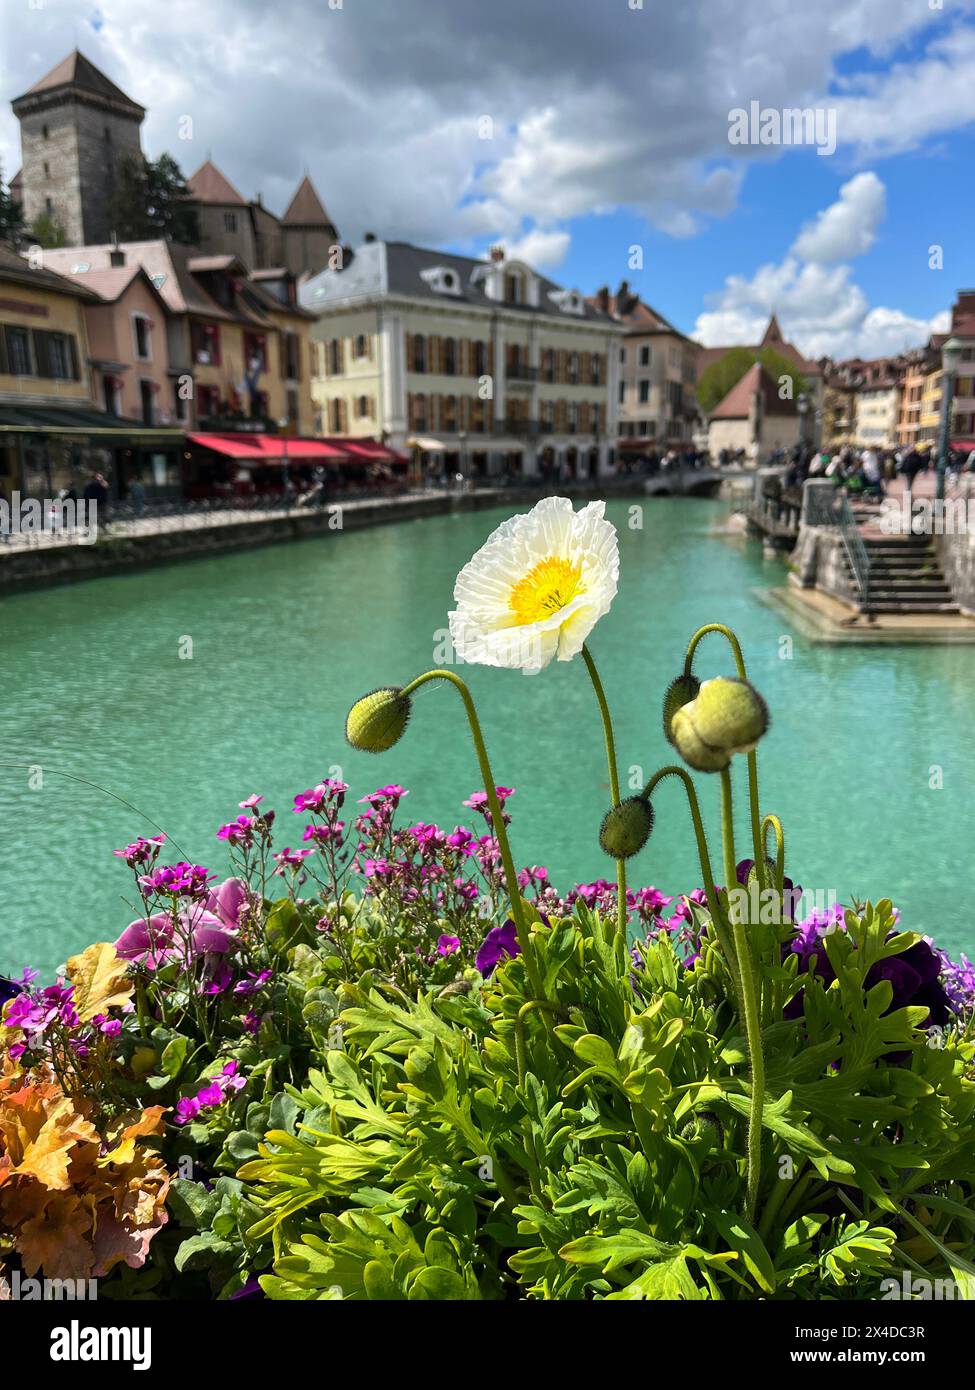 Annecy, Haute-Savoie, France: flowers, old town skyline and crystal clear waters of Thiou River with the iconic Palais de l'Ile on the background Stock Photo